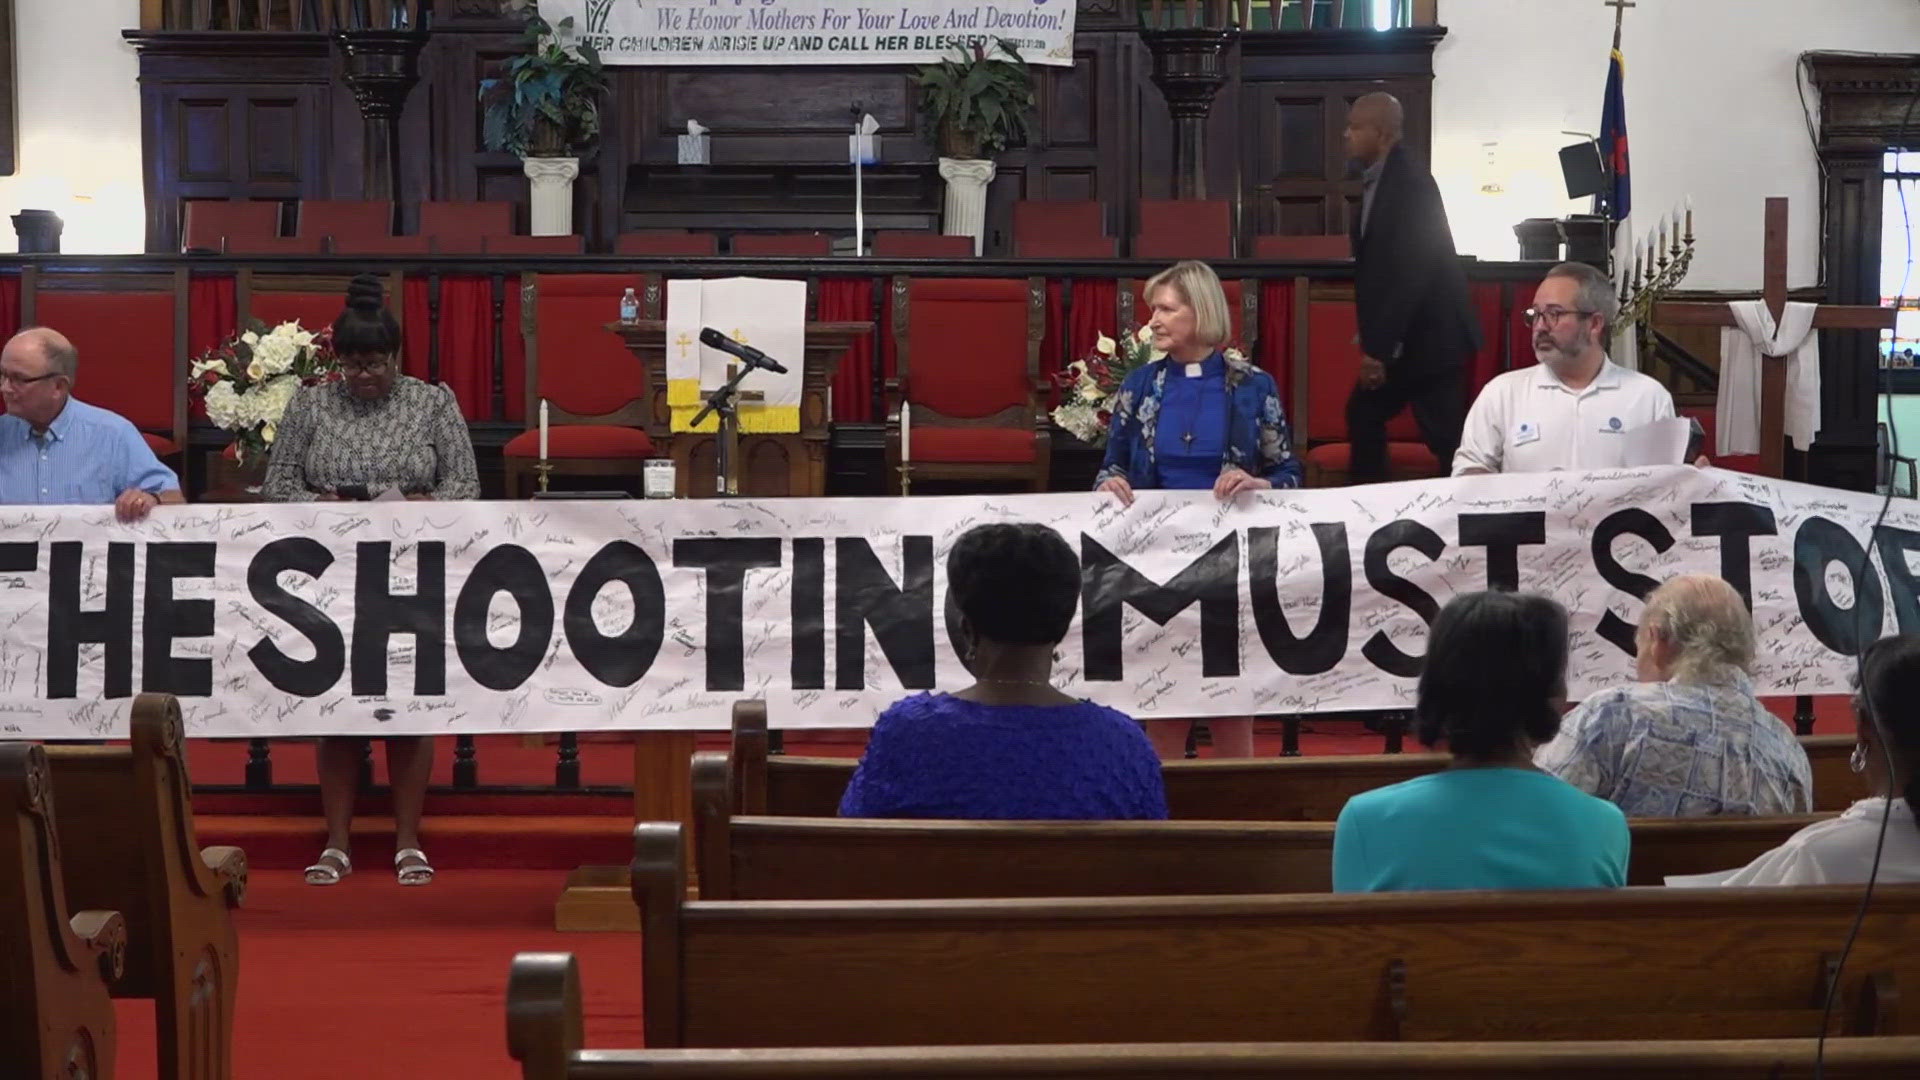 The prayer vigil was dedicated to those who lost loved ones to gun violence.